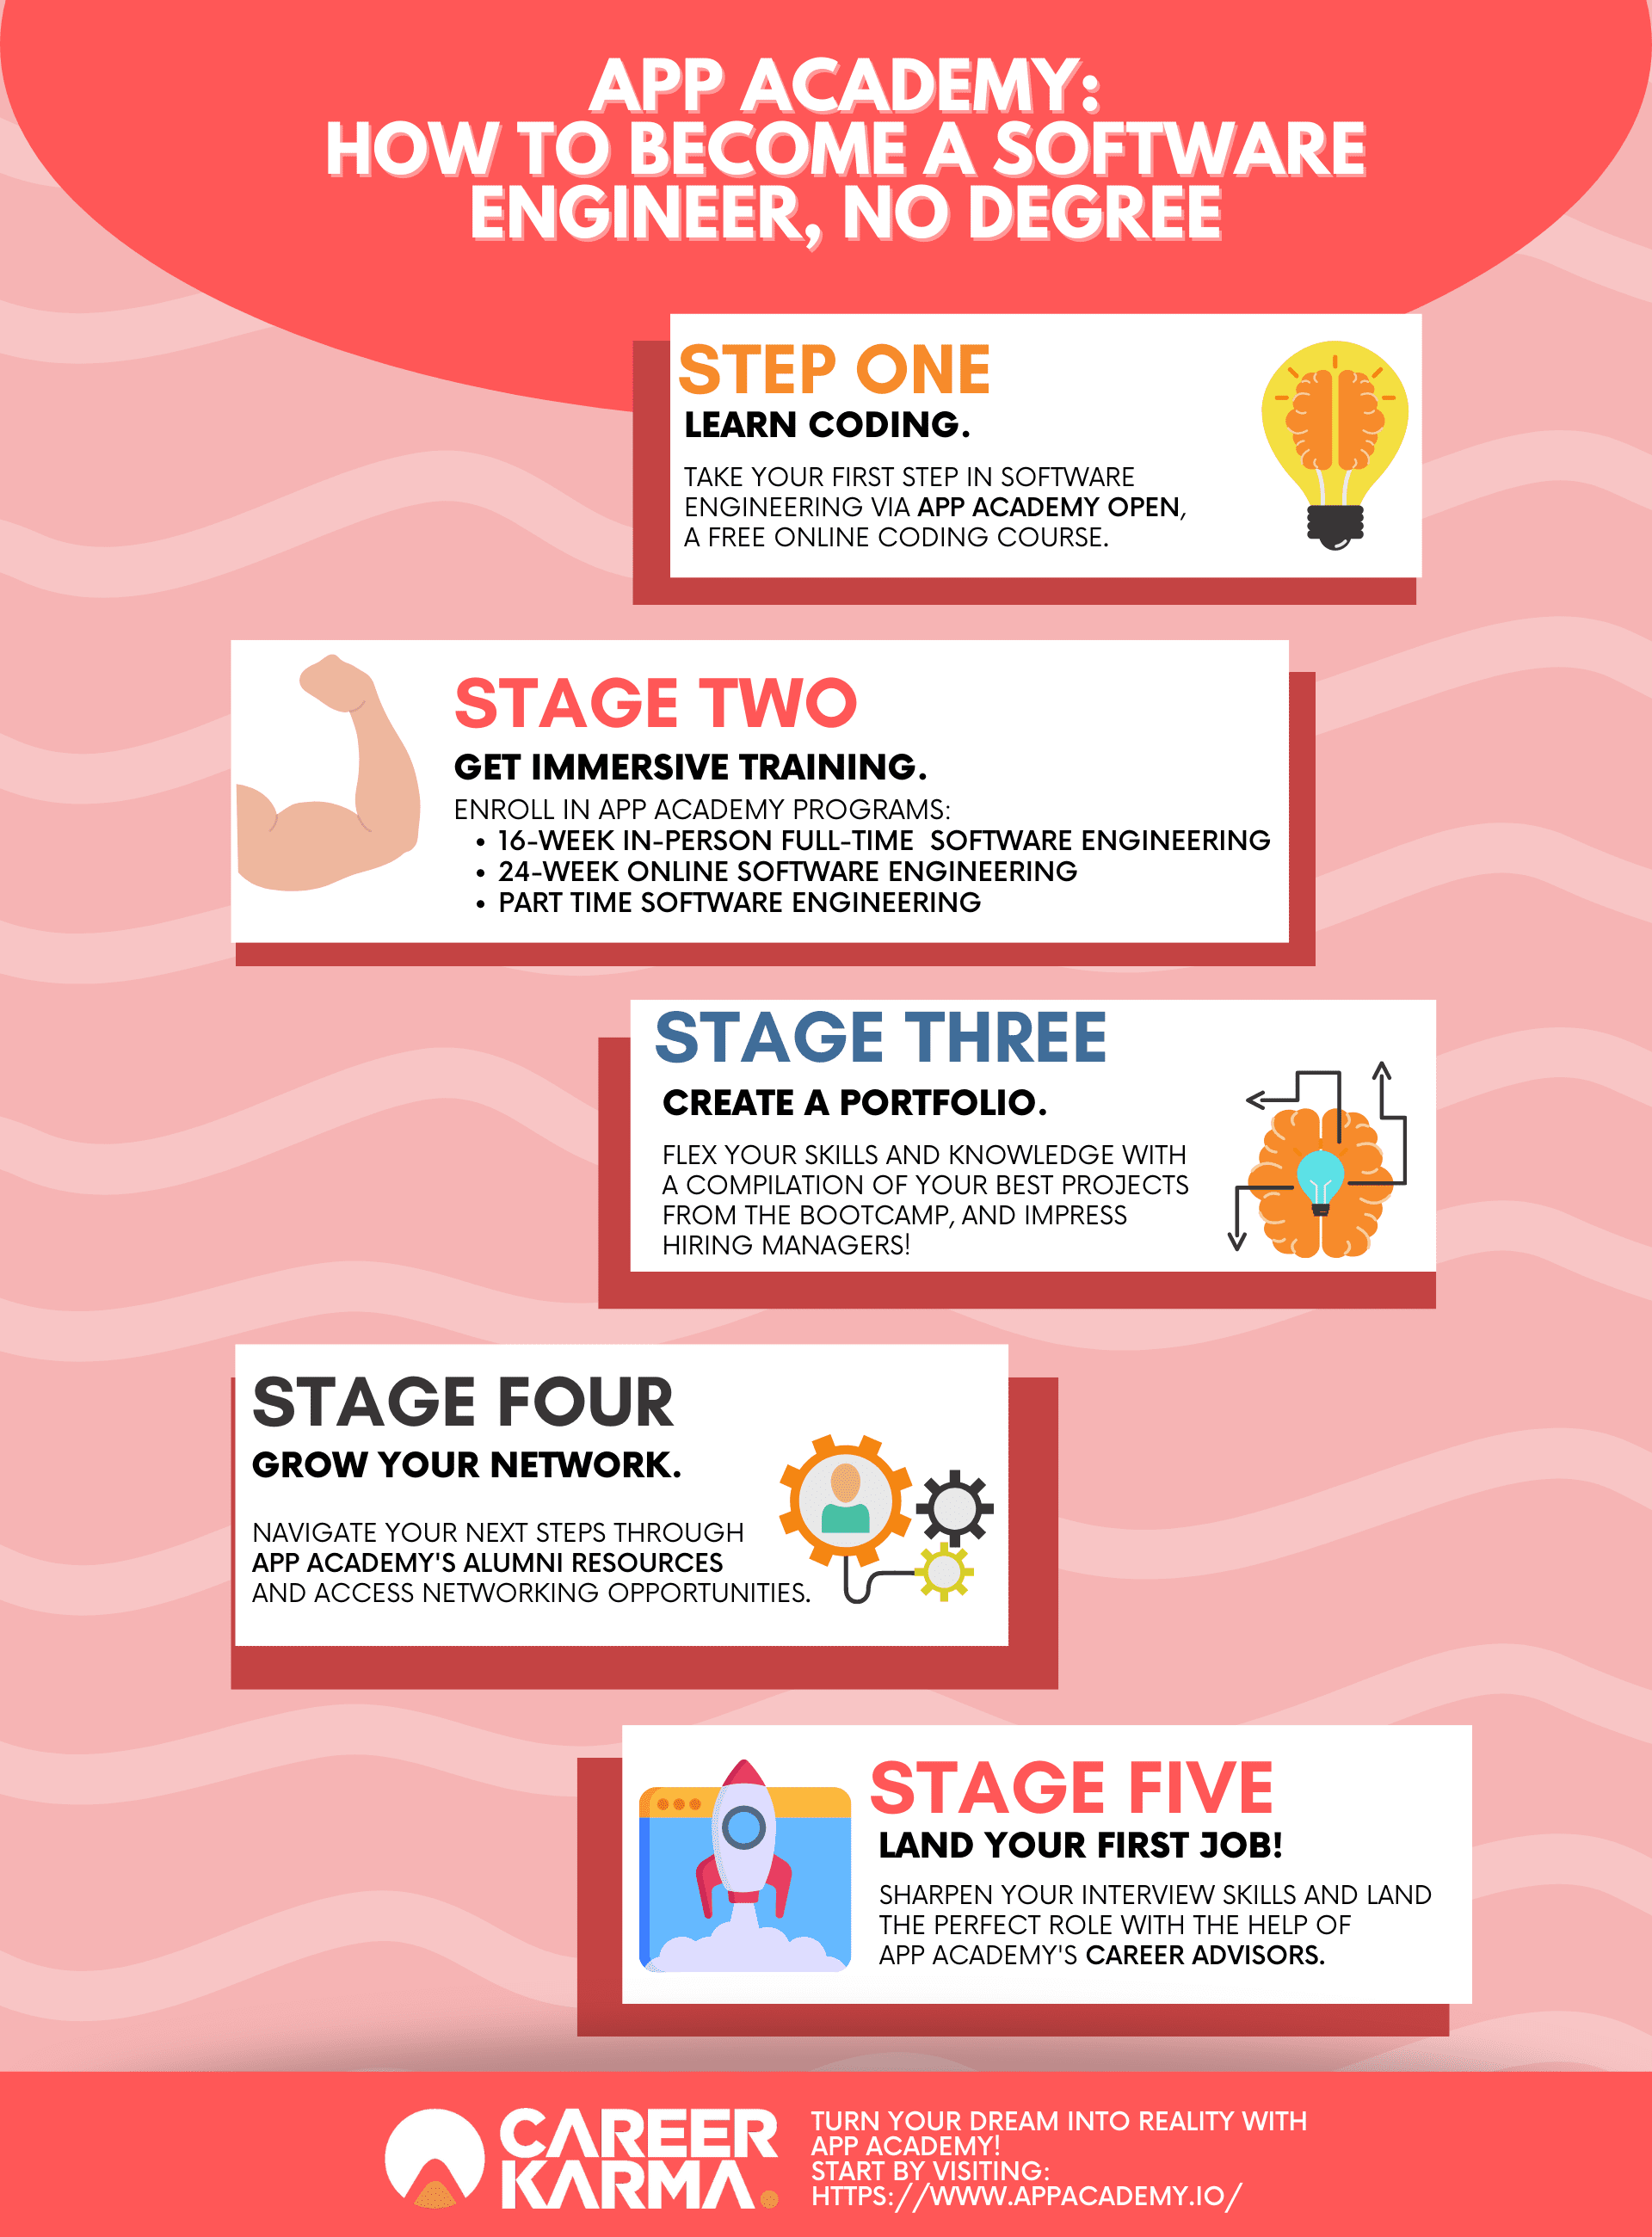 An infographic of the steps you can take to become a software engineer without a computer science degree